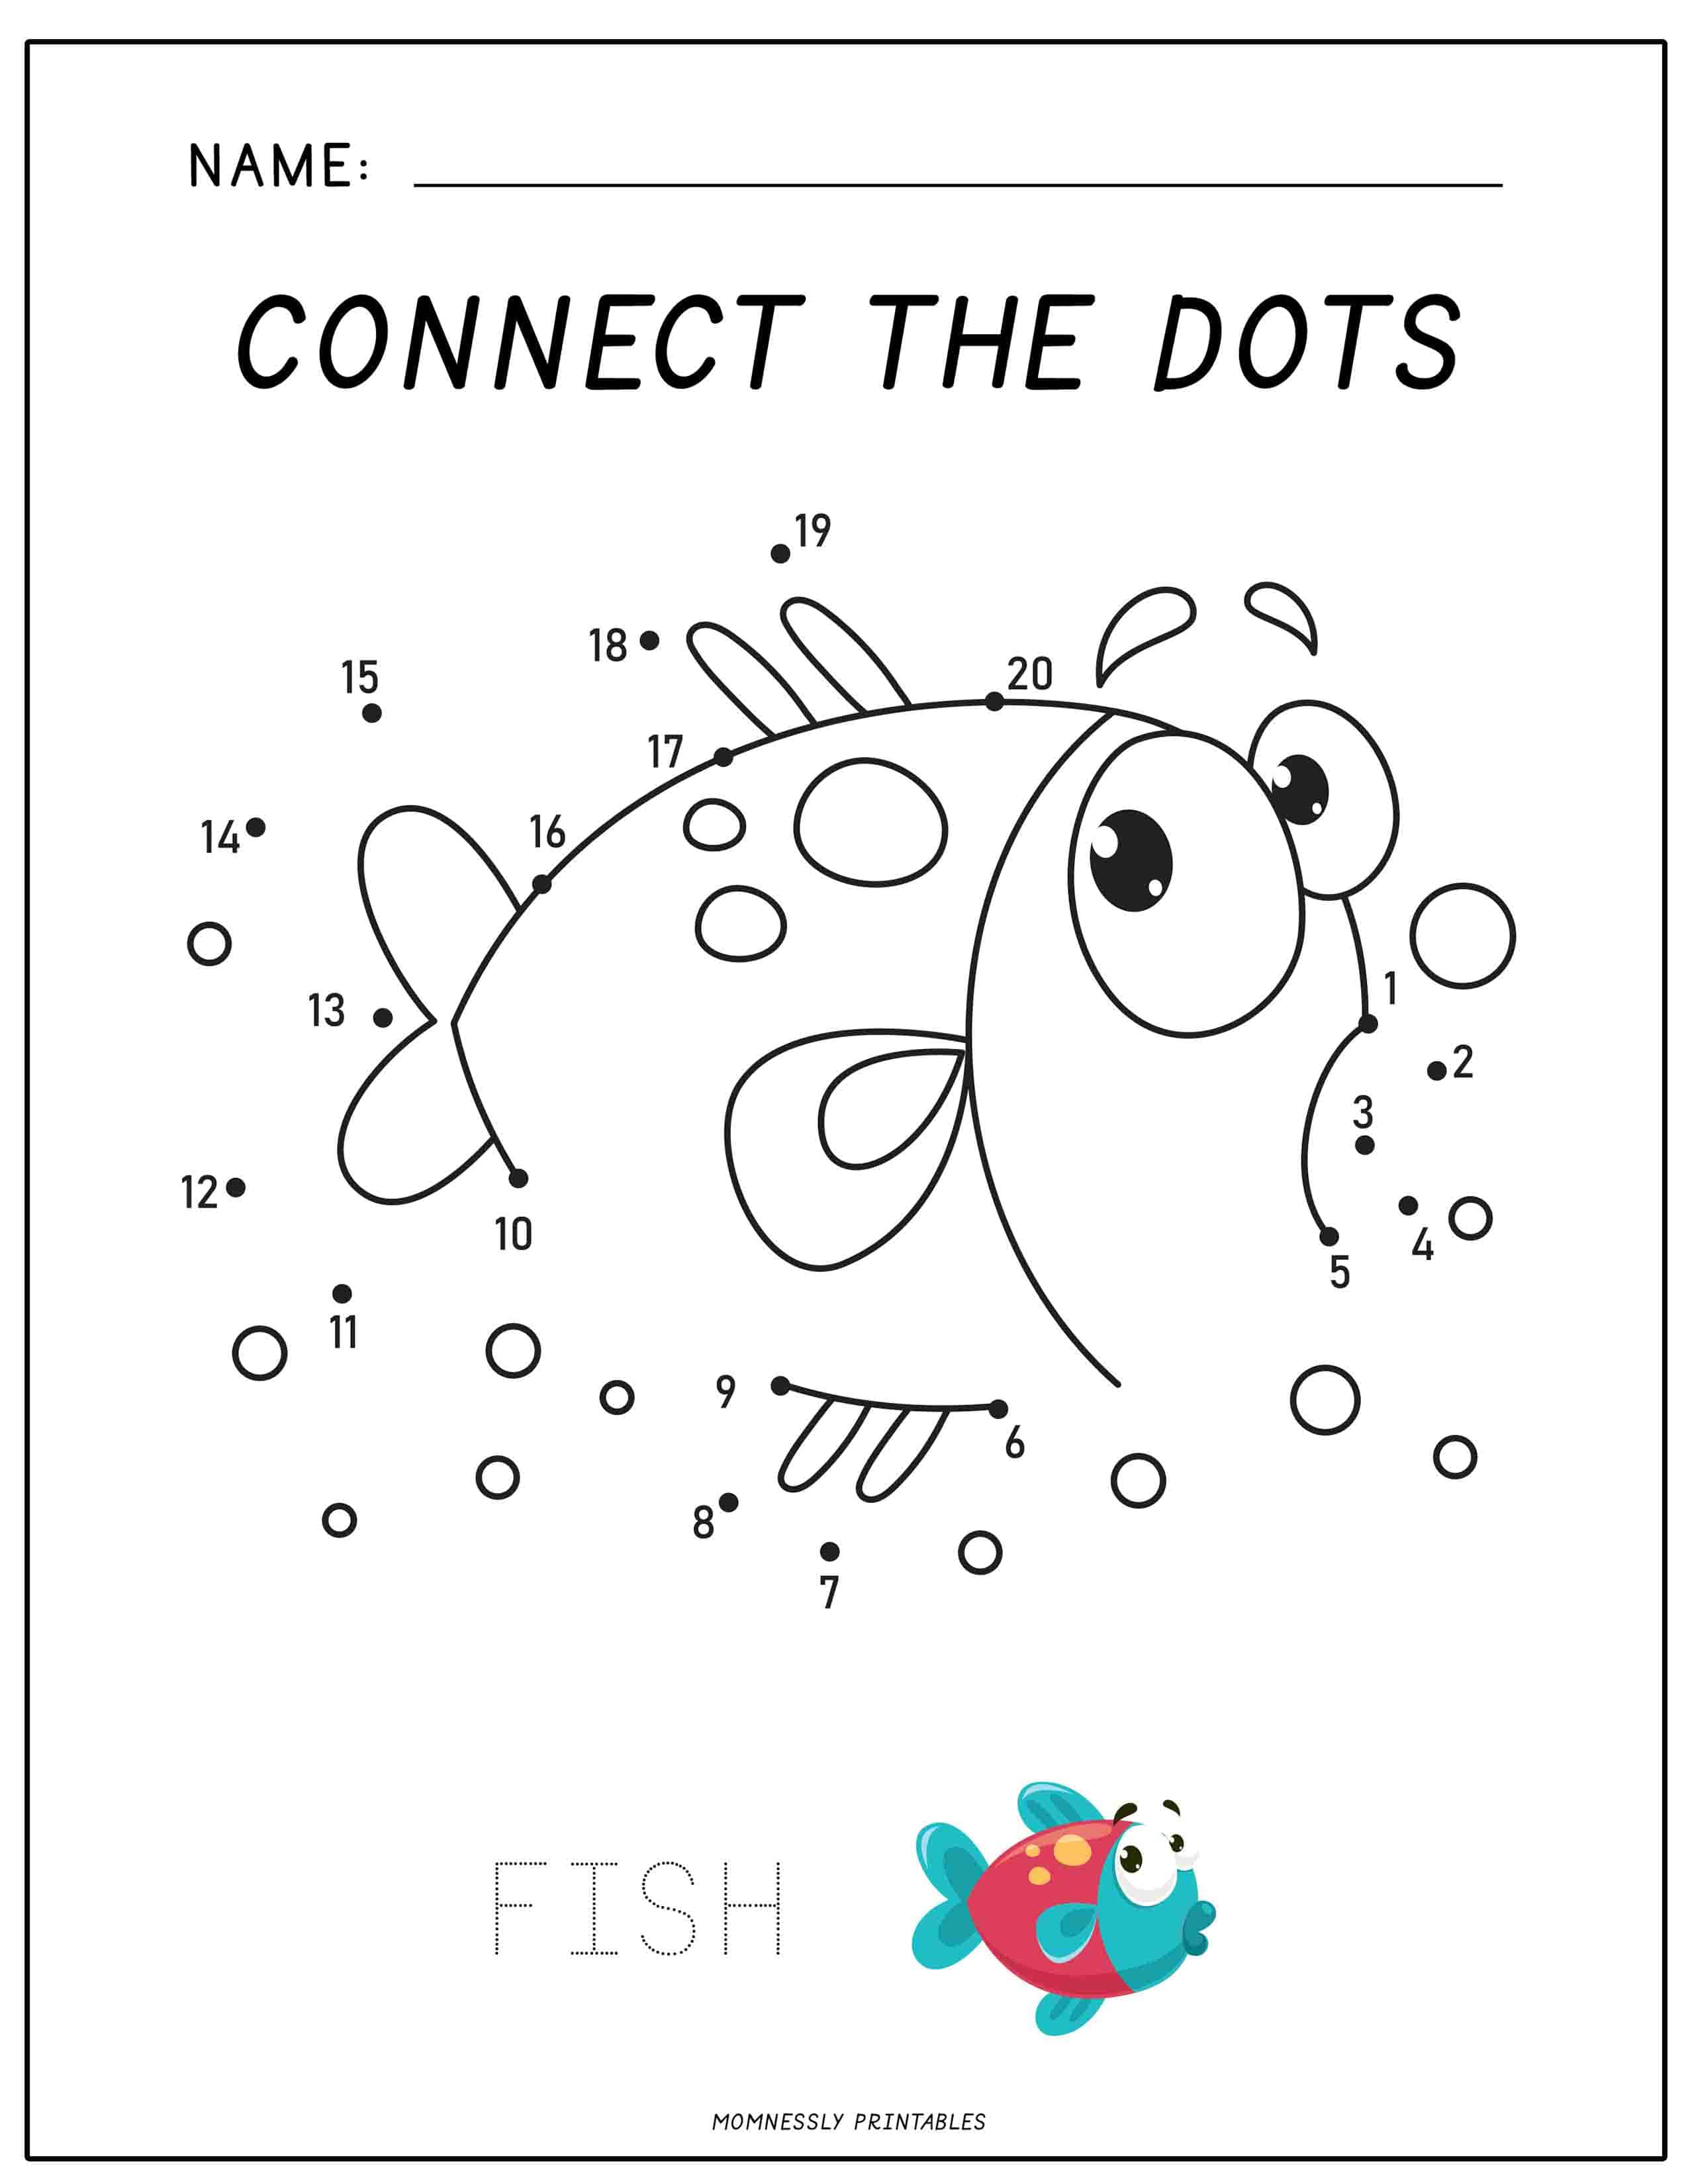 Connect the Dots Free Printable